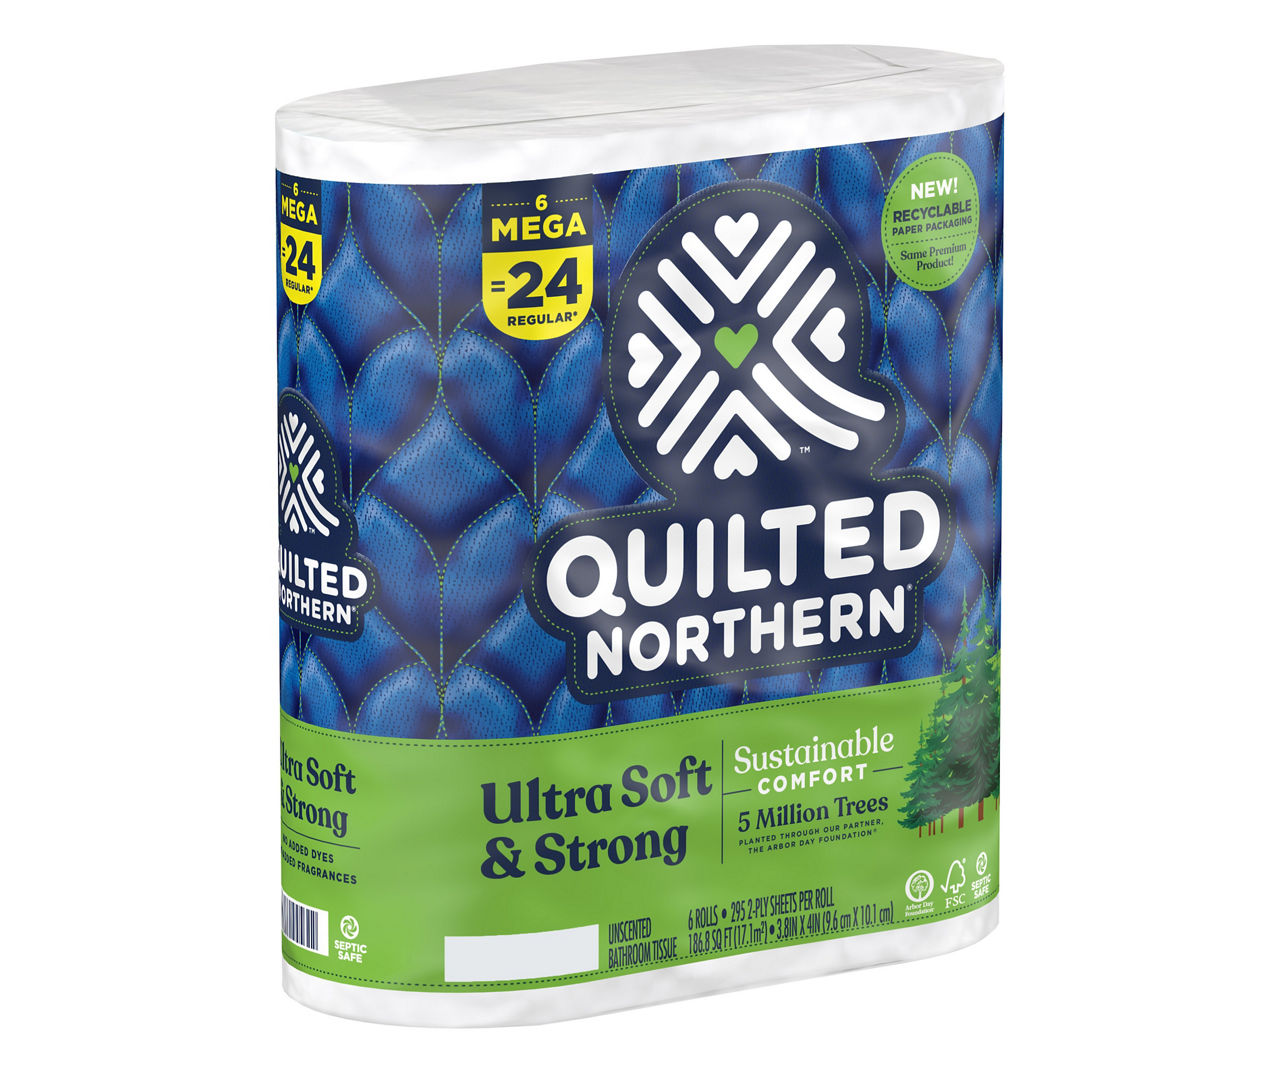 Quilted Northern Ultra Plush® Mega Roll Toilet Paper, 6 rolls - Fred Meyer